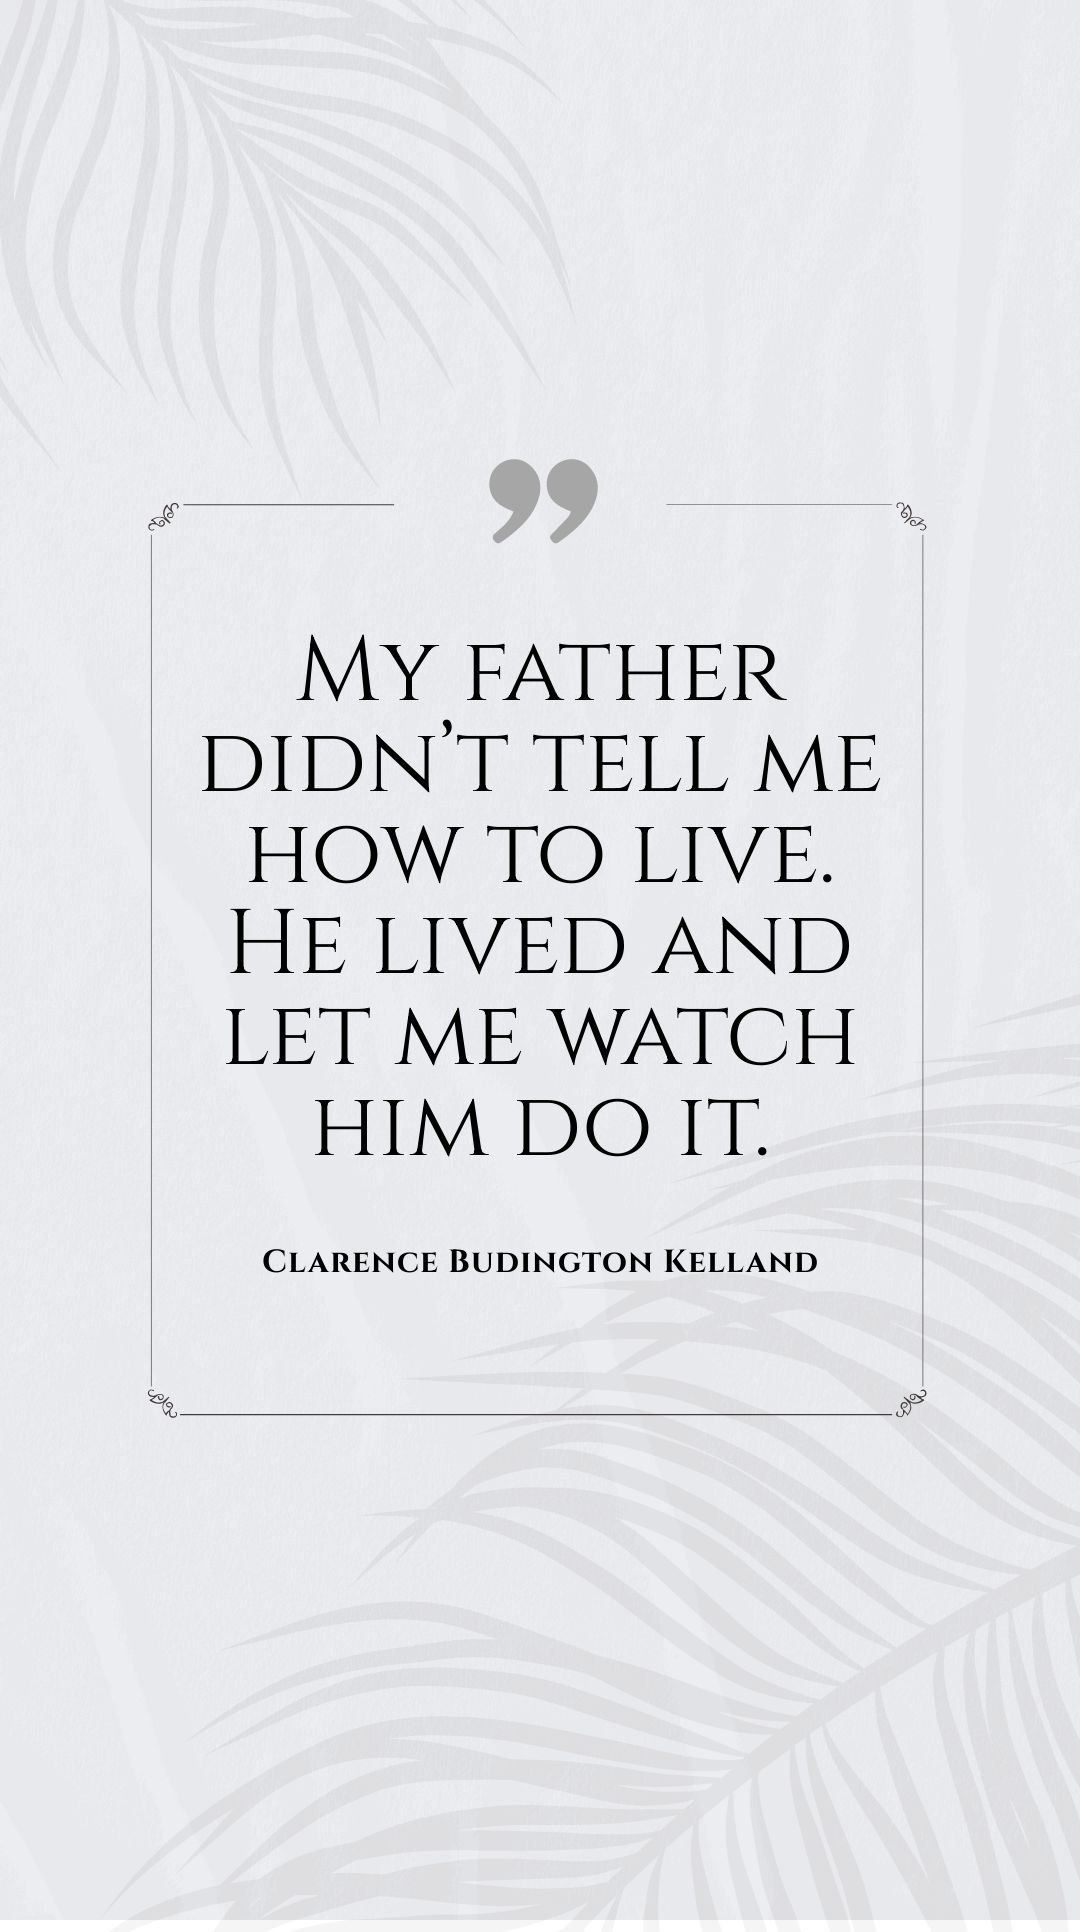 Free Clarence Budington Kelland - “My father didn’t tell me how to live. He lived and let me watch him do it.”